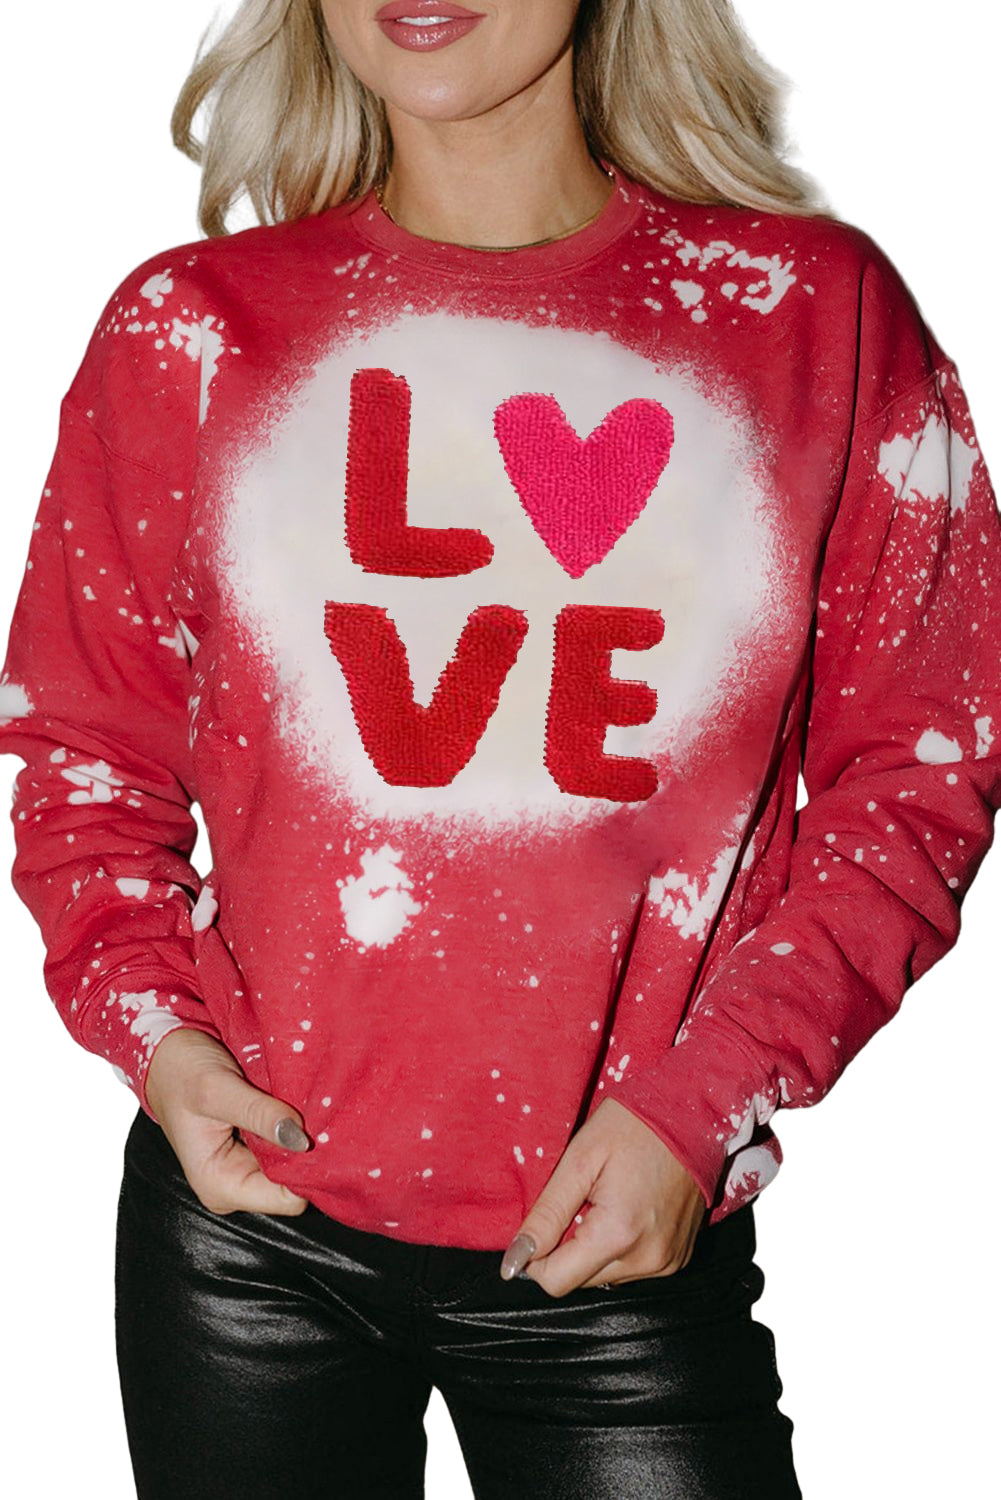 Fiery Red Tie Dye LOVE Chenille Embroidered Graphic Sweatshirt